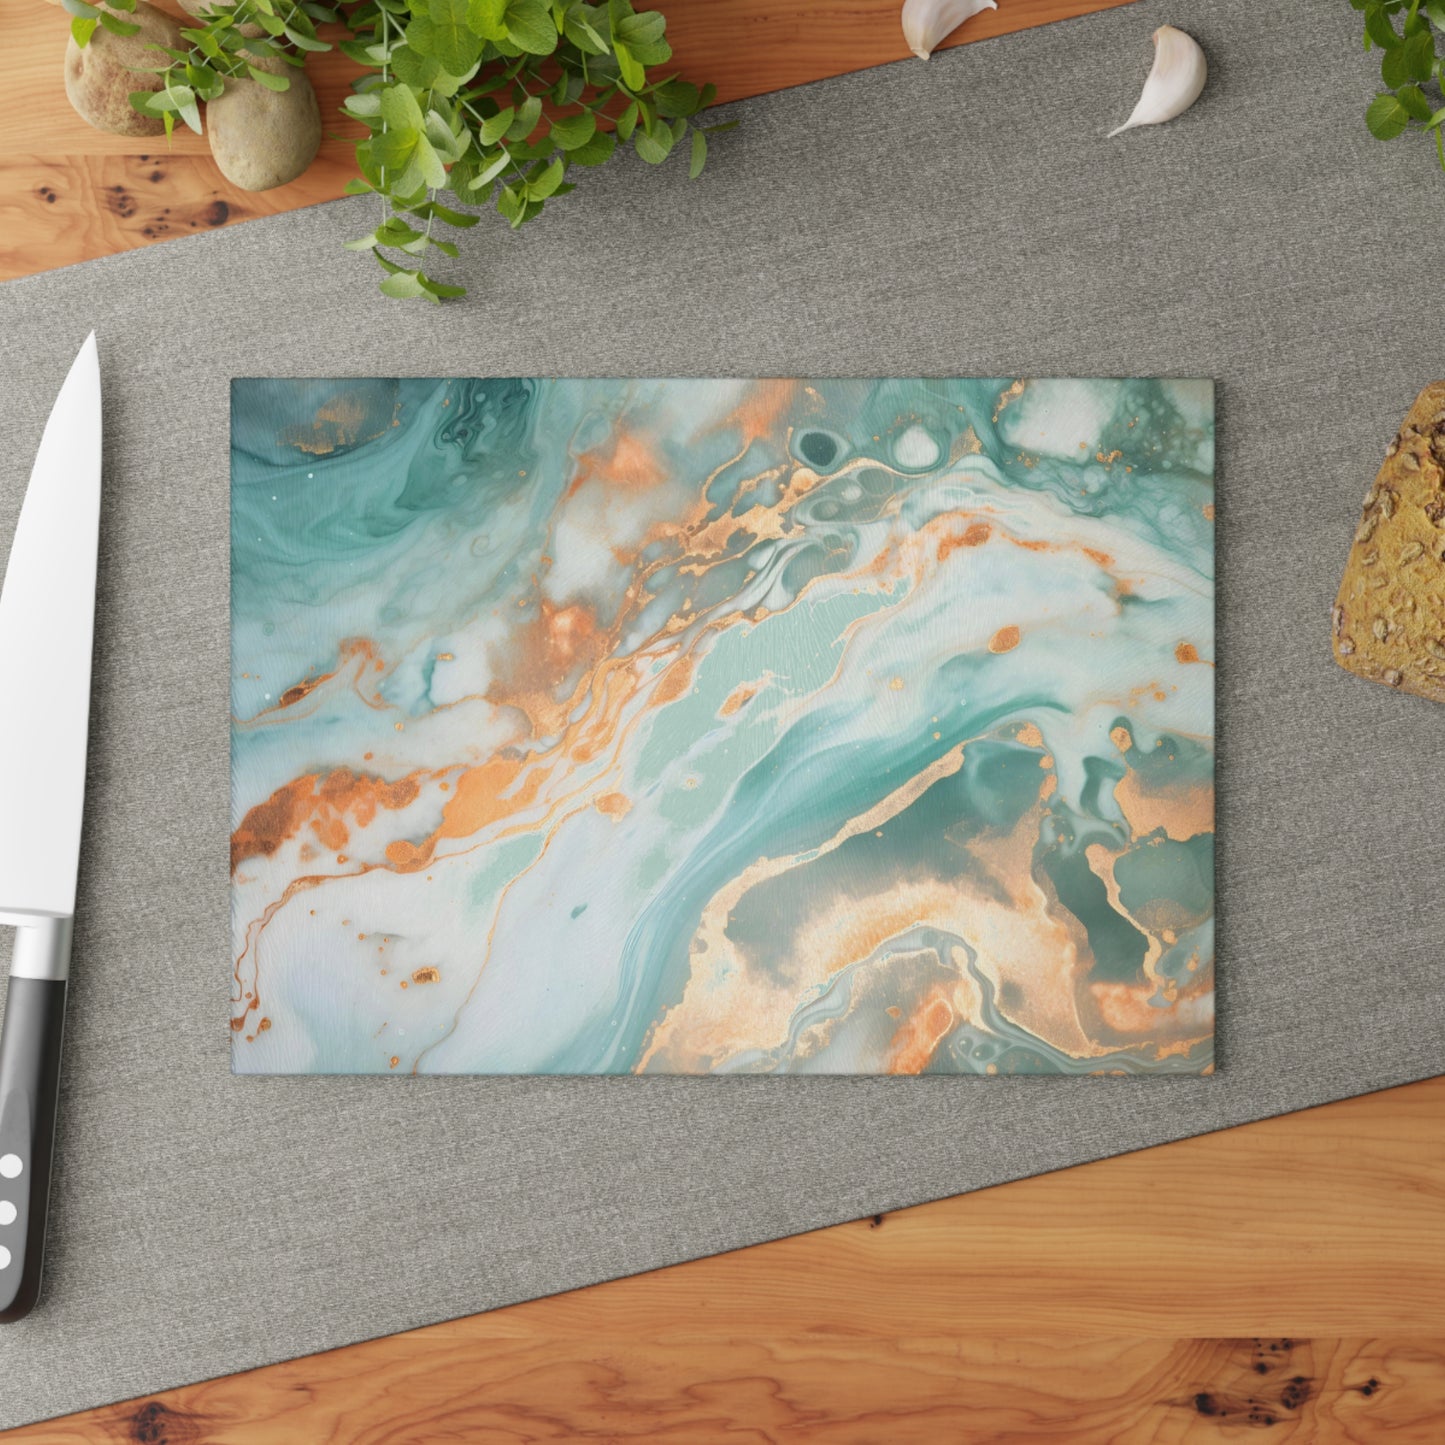 Soft Teal and Ivory Marble Glass Cutting Board